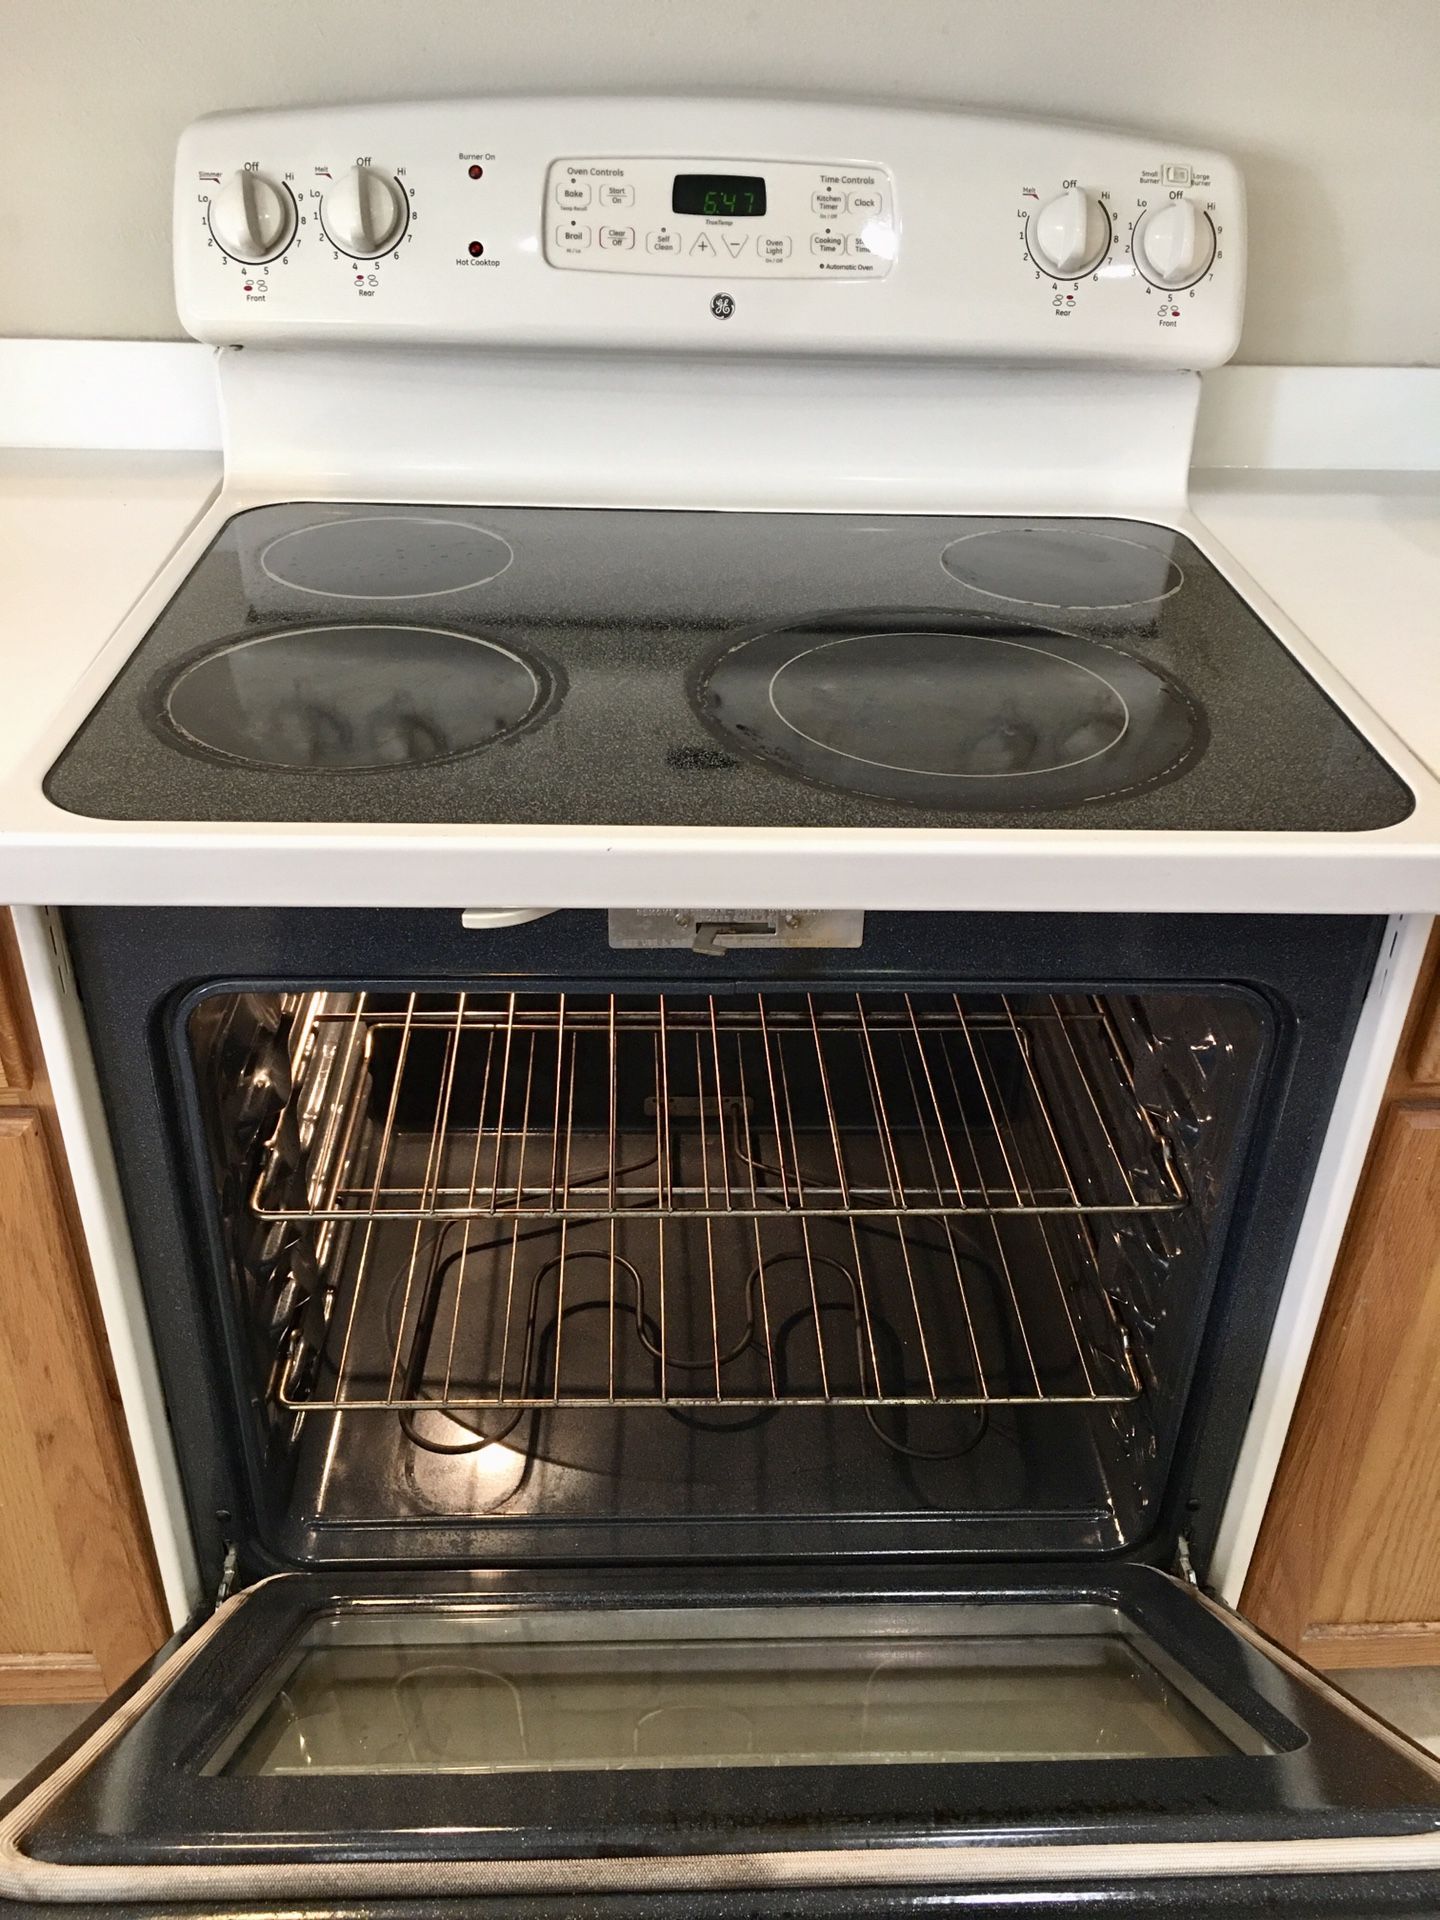 General Electric glass top stove with self cleaning